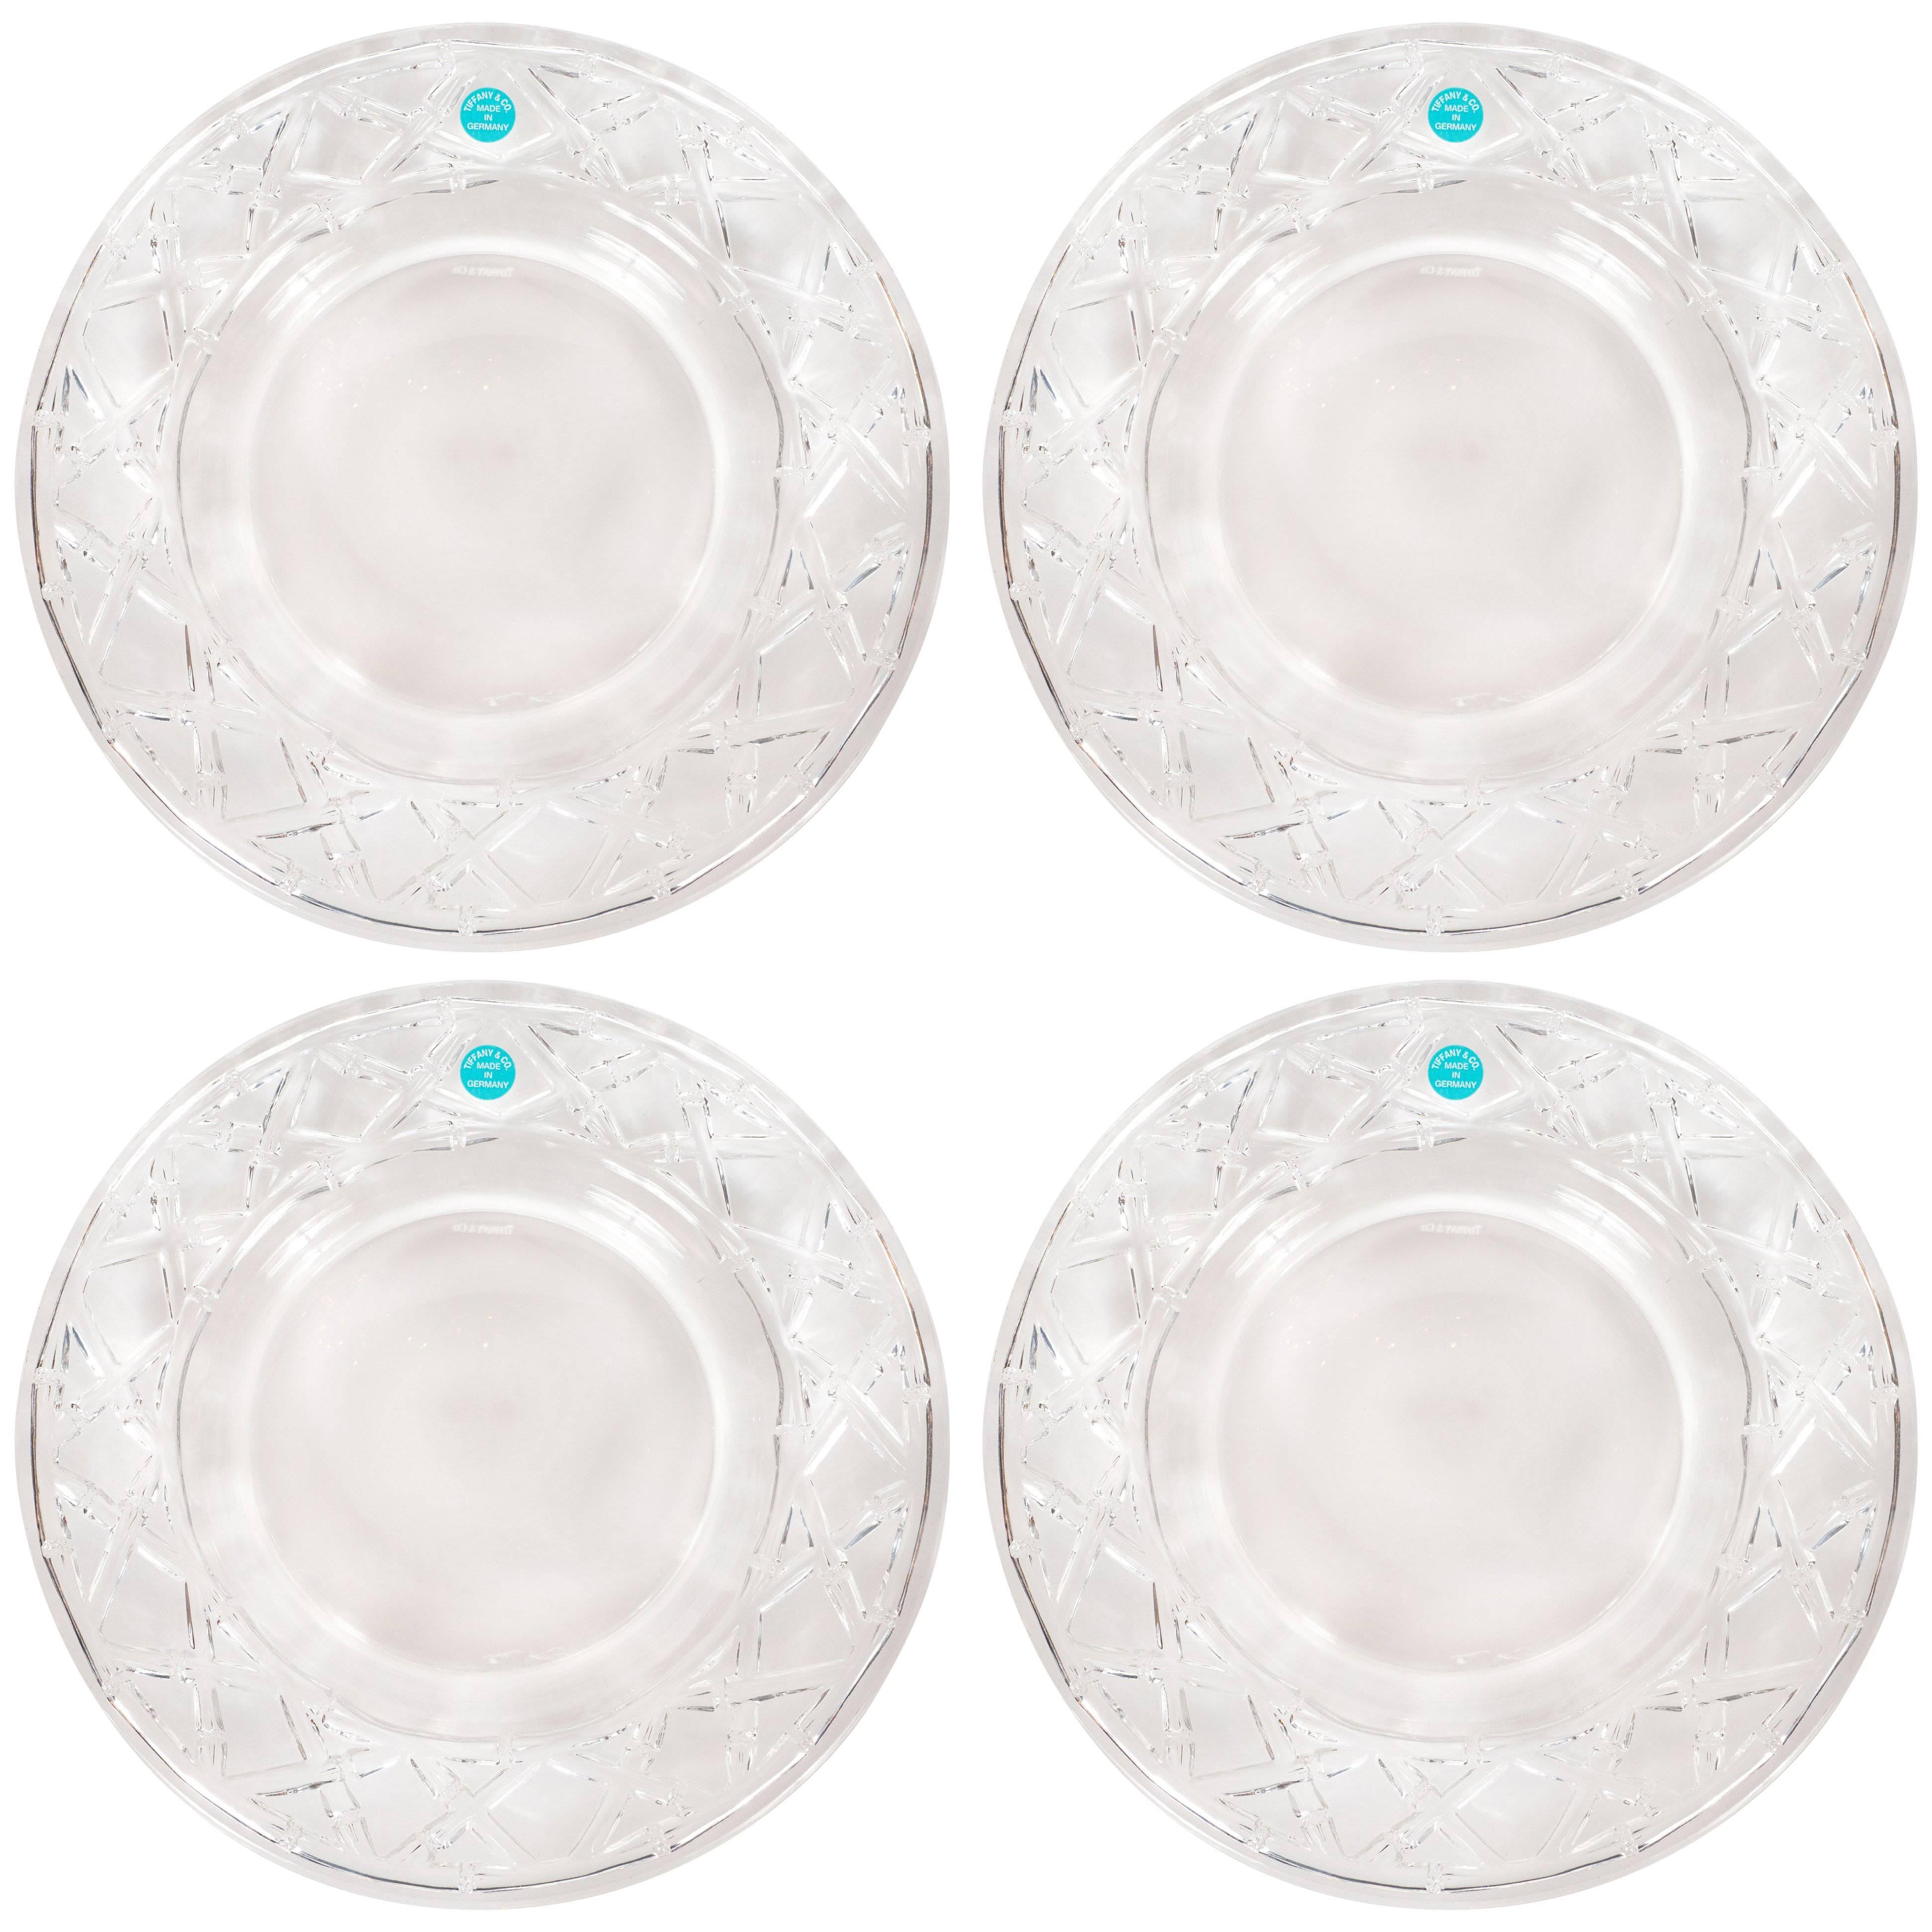 https://a.1stdibscdn.com/set-of-four-glass-basketweave-dessert-hors-doeuvres-plates-by-tiffany-co-for-sale/3663232/f_108118031527630085052/P1244730p_org_master.jpg